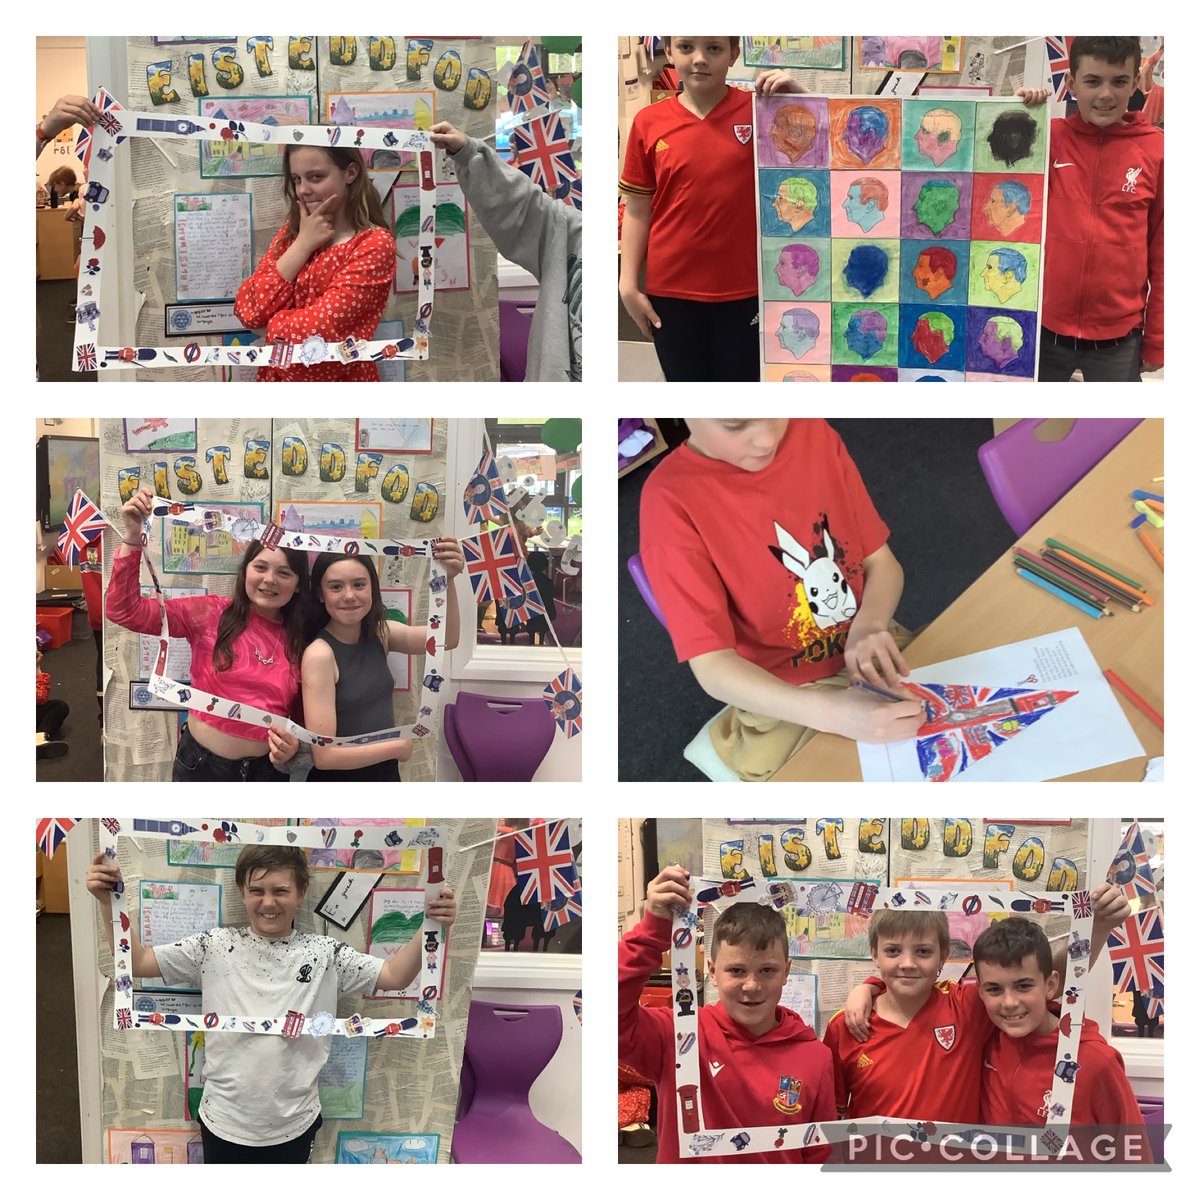 today we celebrated #KingCharleslll coronation in class. We used our creative talents by making bunting, a selfie frame and a 1960s pop art inspired display. #Creative #Coronation